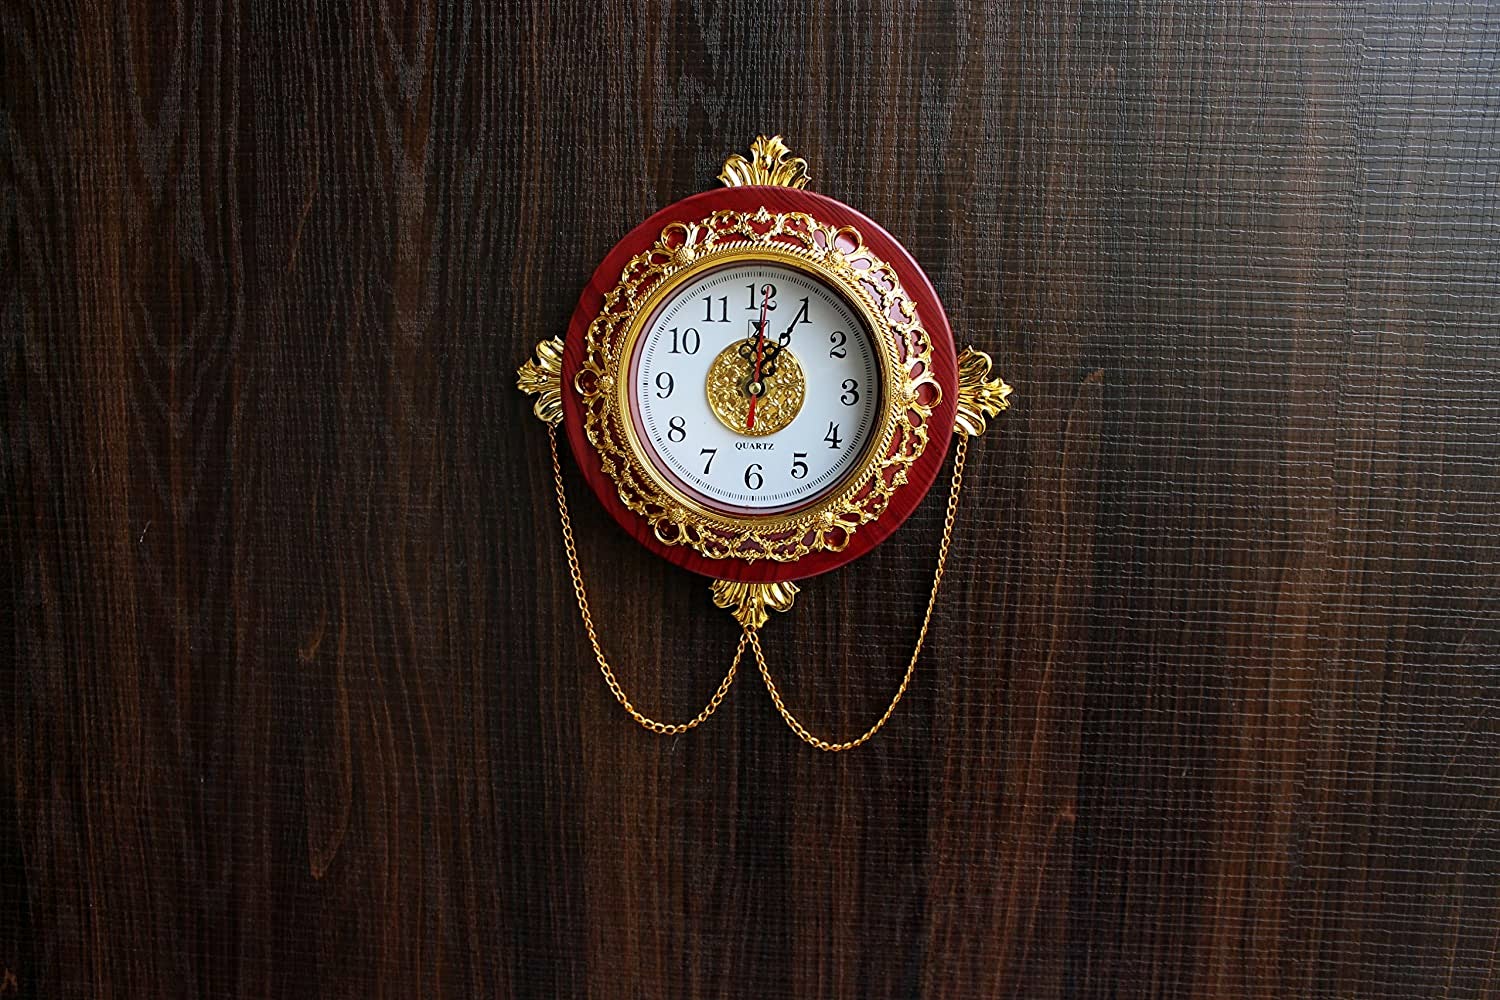 FunkyTradition Royal Designer Gold Plated Premium Wall Clock for Home Office Decor and Gifts for Anniversary Birthday and Housewarming